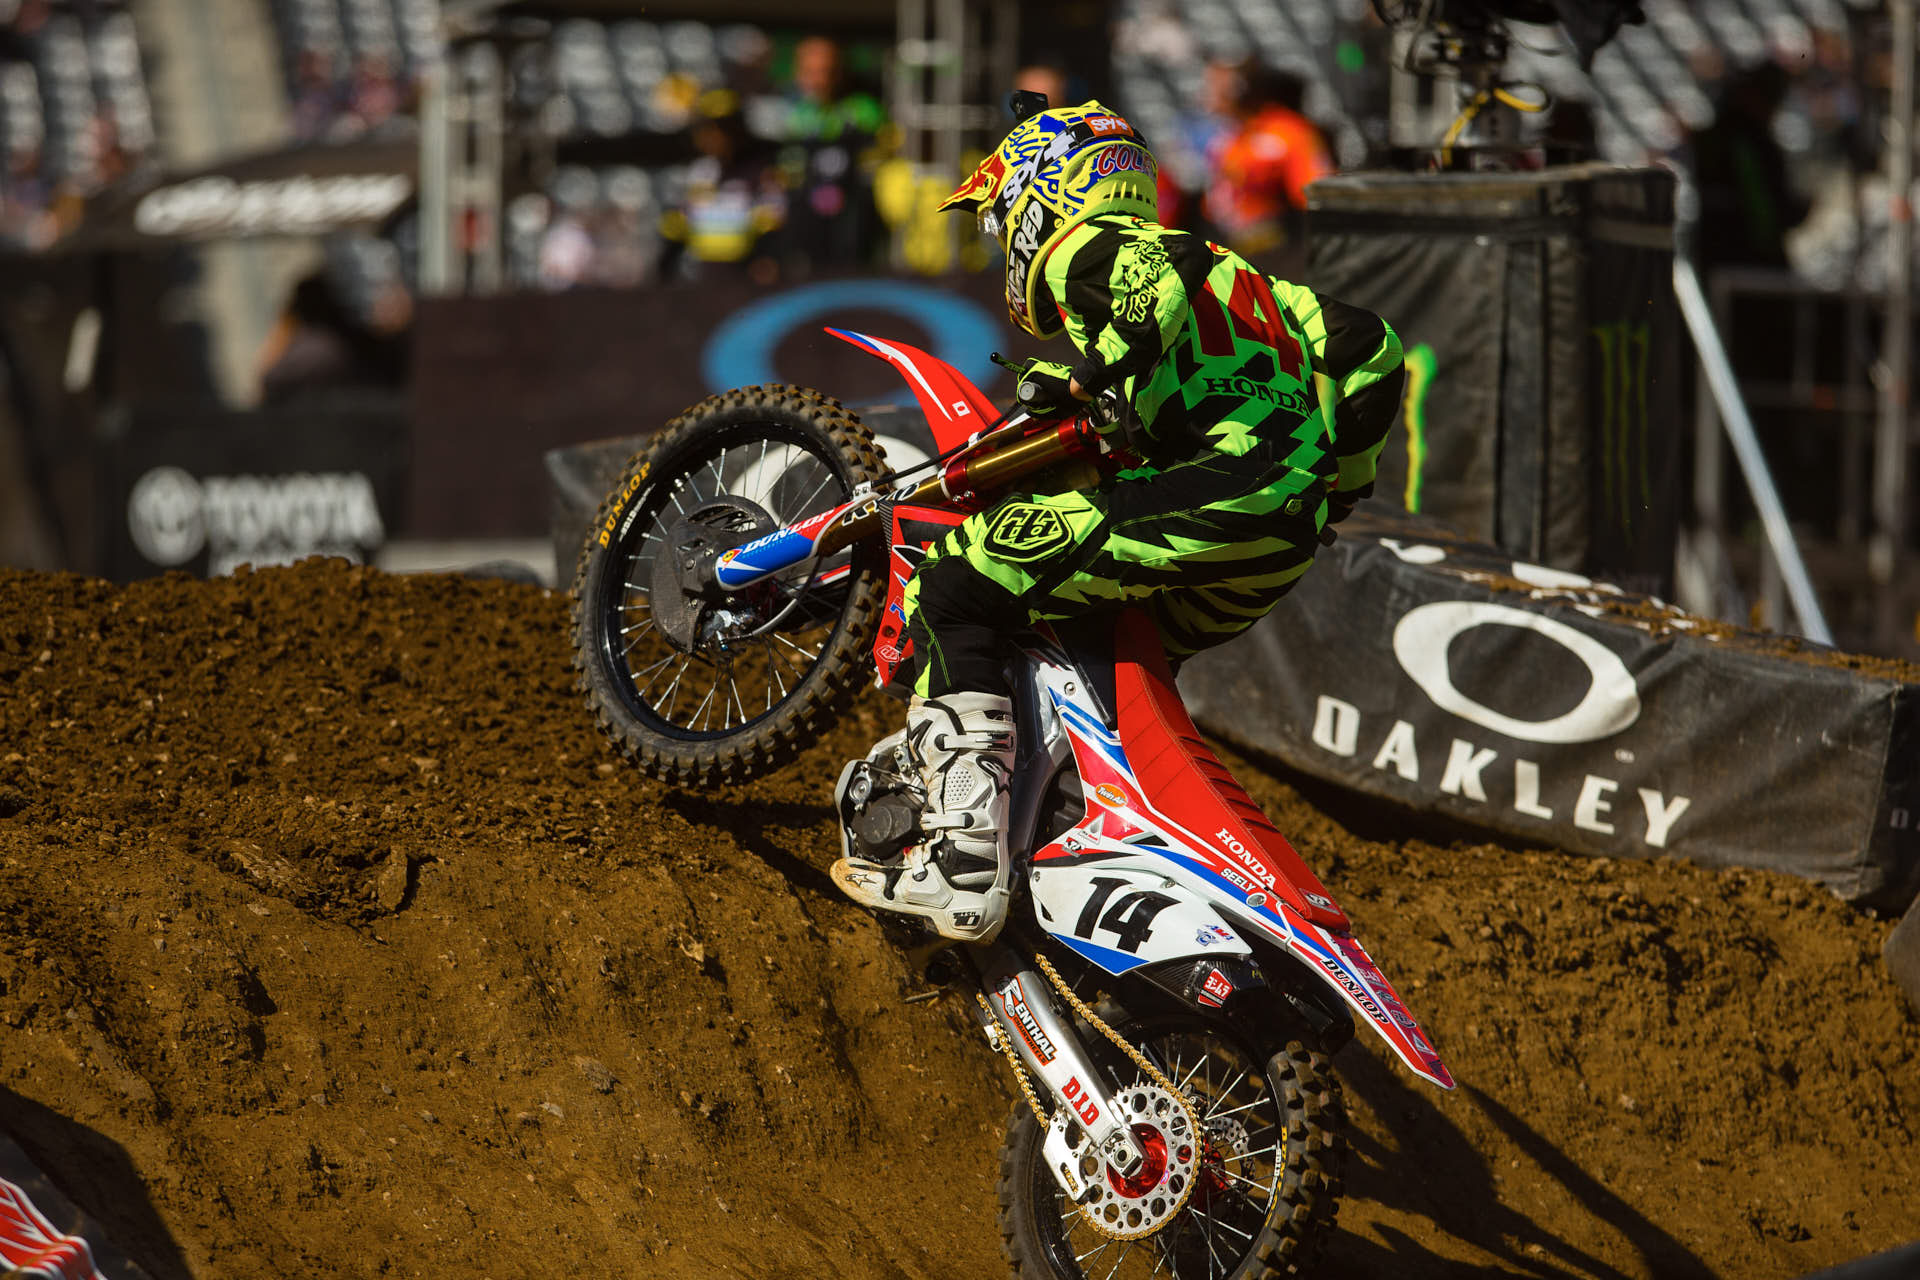 The MetLife circuit had  some tough obstacles that kept the riders on their toes, and this wall was one of them. 